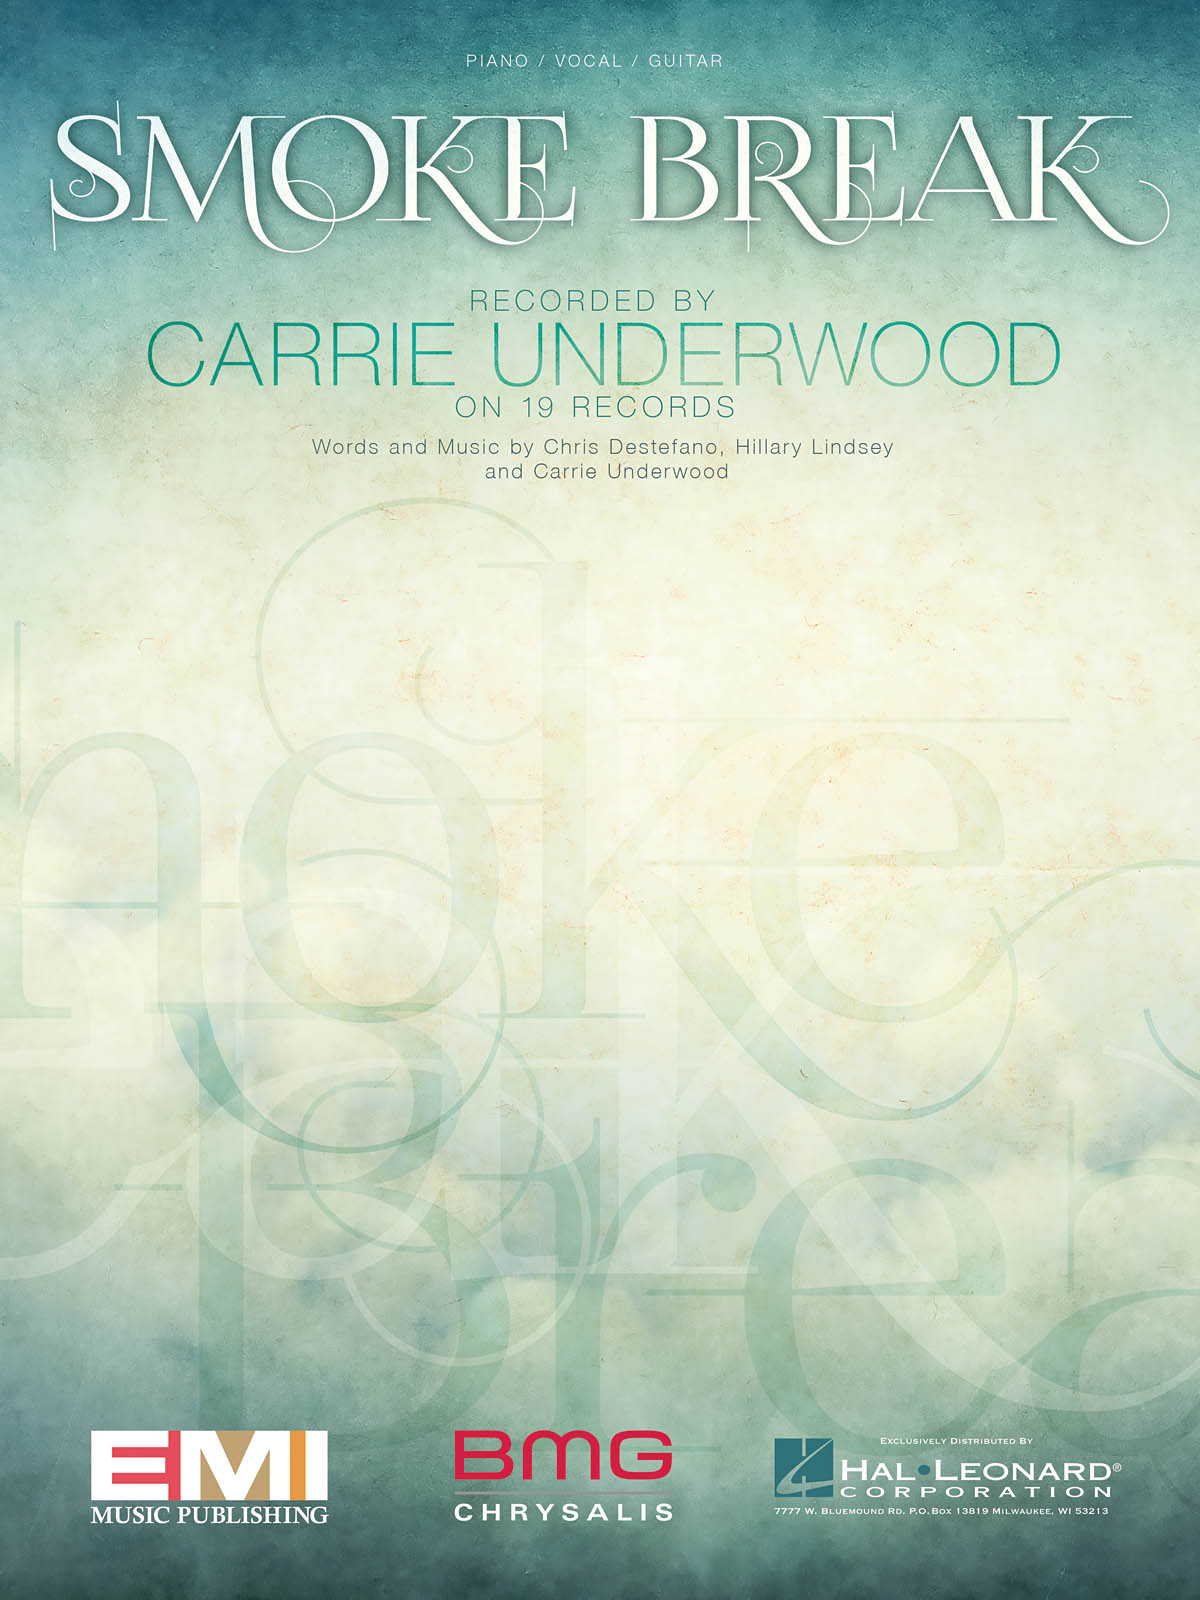 Carrie Underwood: Smoke Break: Vocal and Piano: Single Sheet